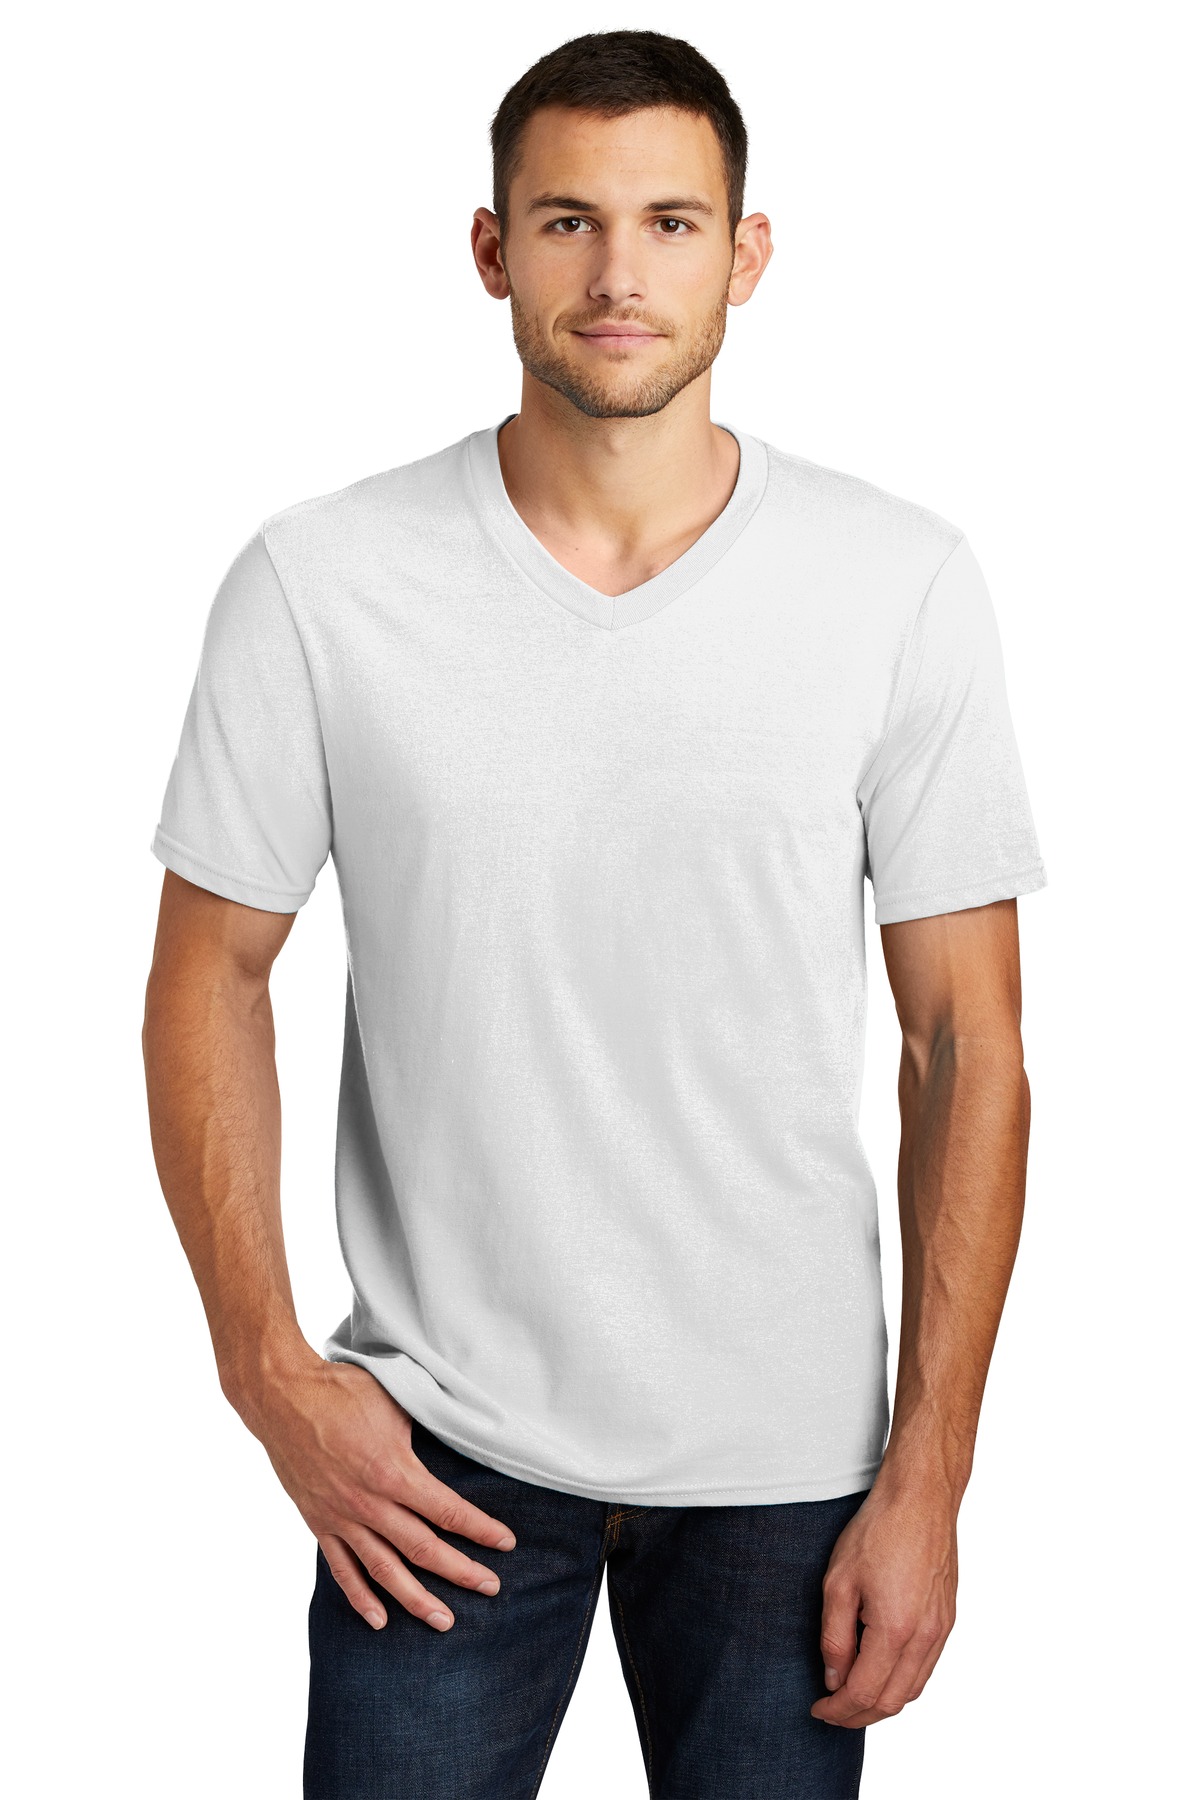 District Hospitality T-Shirts ® Very Important Tee® V-Neck.-District